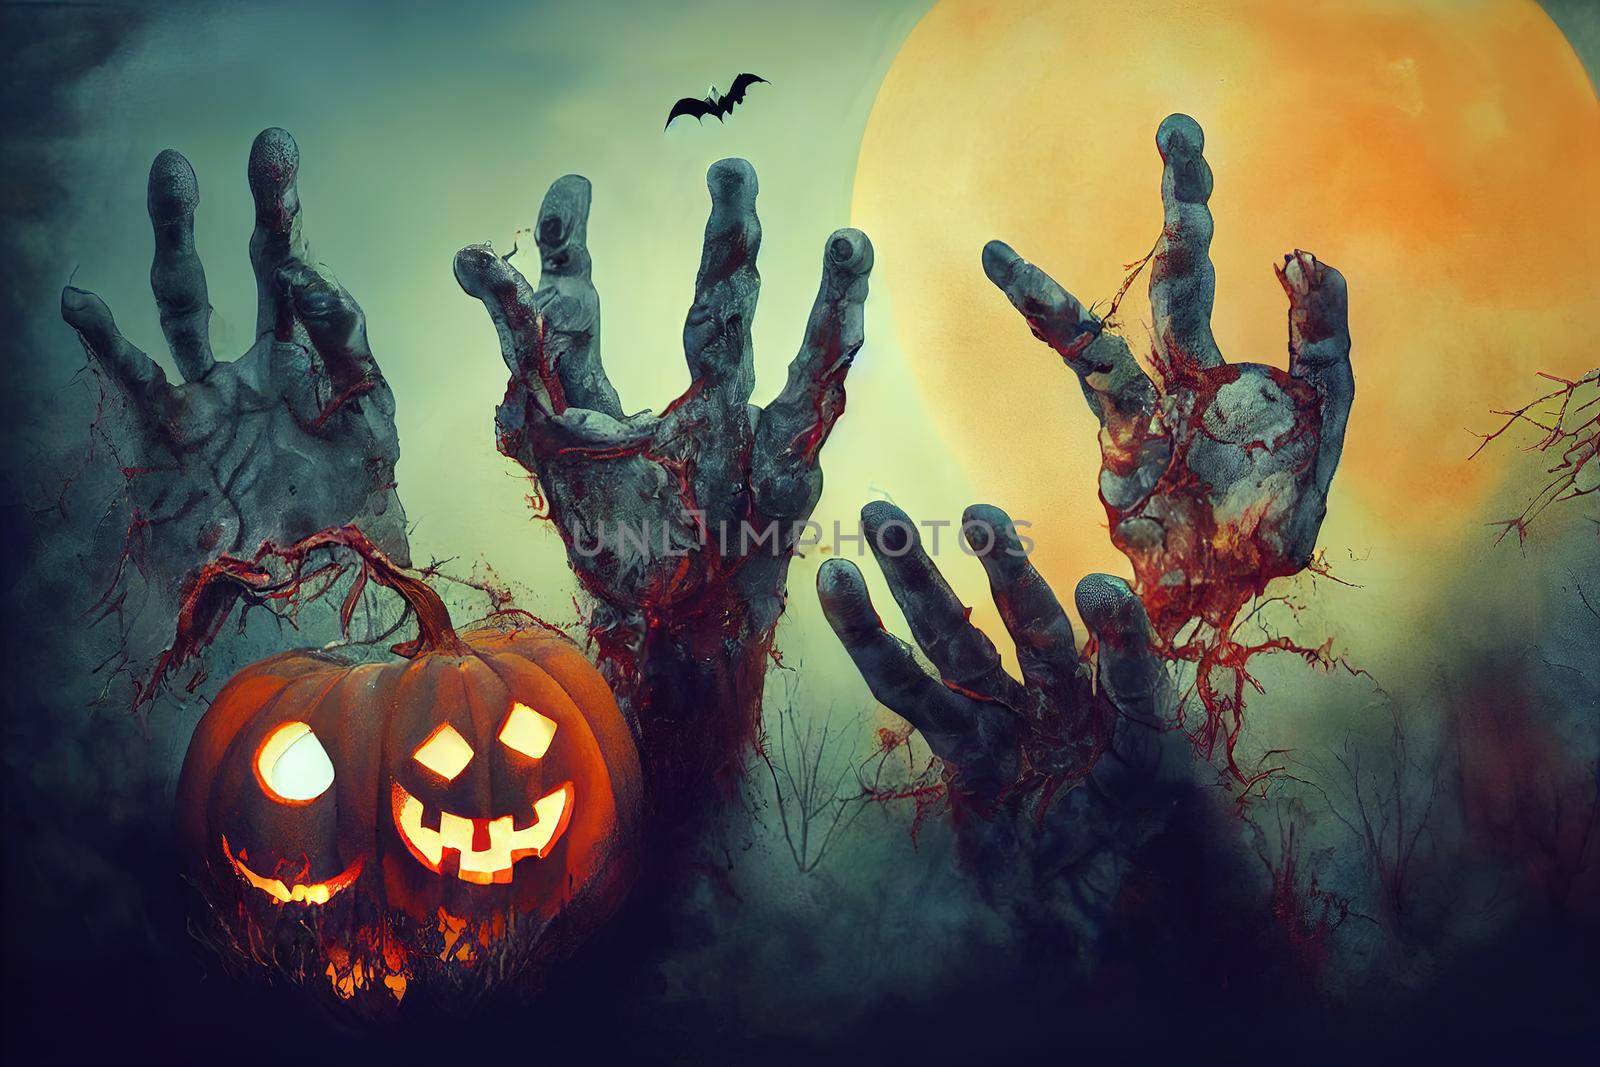 zombie hands, halloween theme 2d illustrated rough grungy design by 2ragon